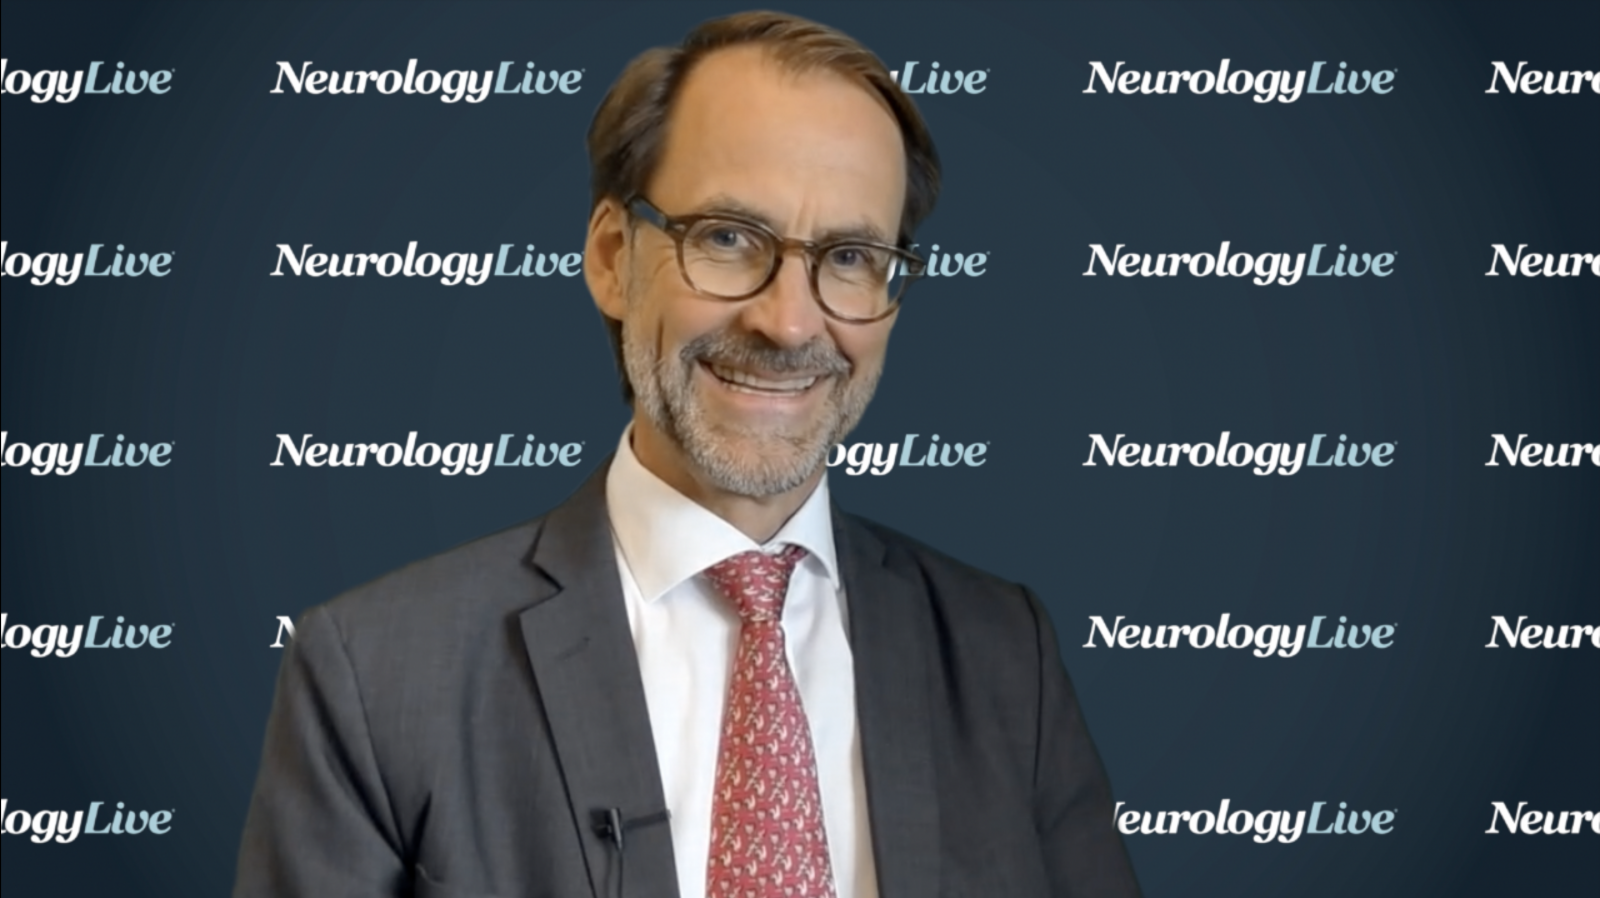 Jan Hillert, MD, PhD: Treating the Non-Inflammatory Aspects of MS